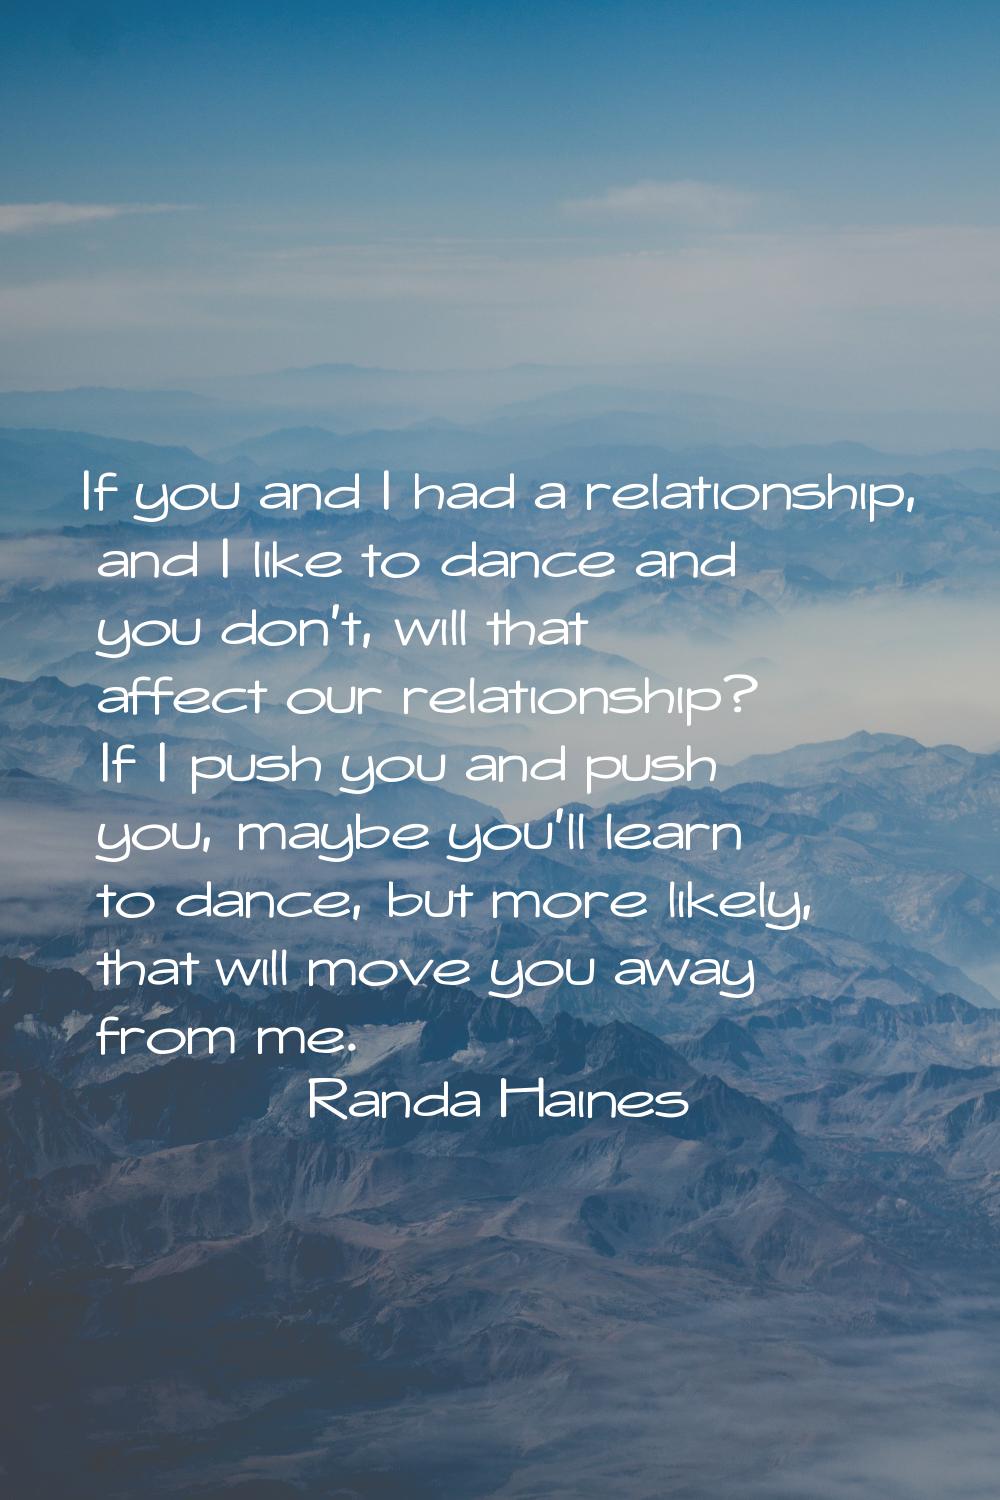 If you and I had a relationship, and I like to dance and you don't, will that affect our relationsh